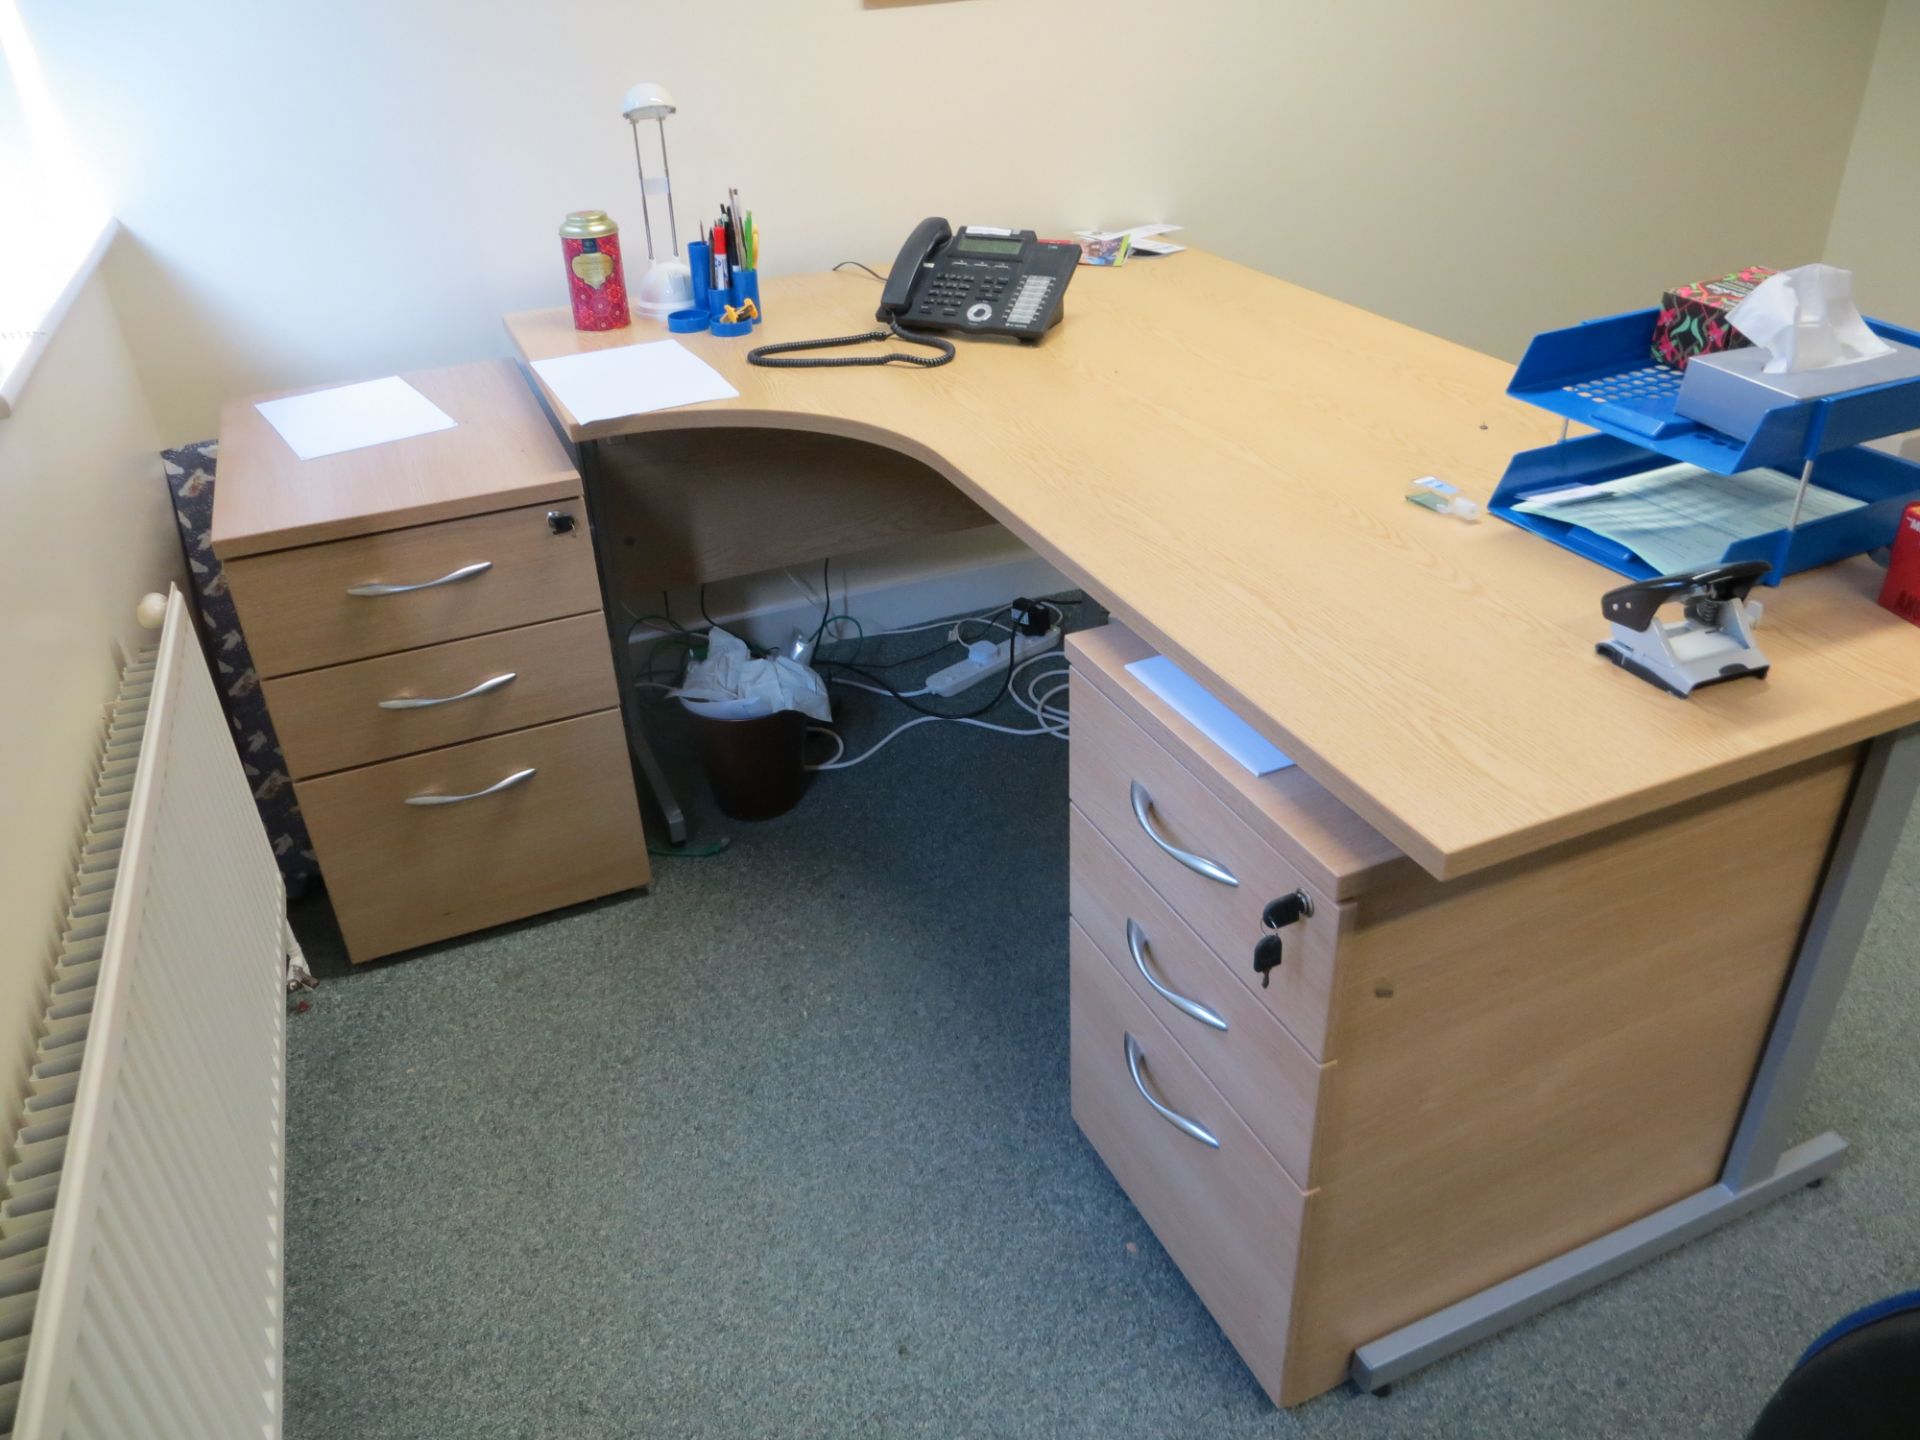 Contents of office by laundry room to include wave front desk, two pedestals, swivel & tilt chair, - Image 3 of 3